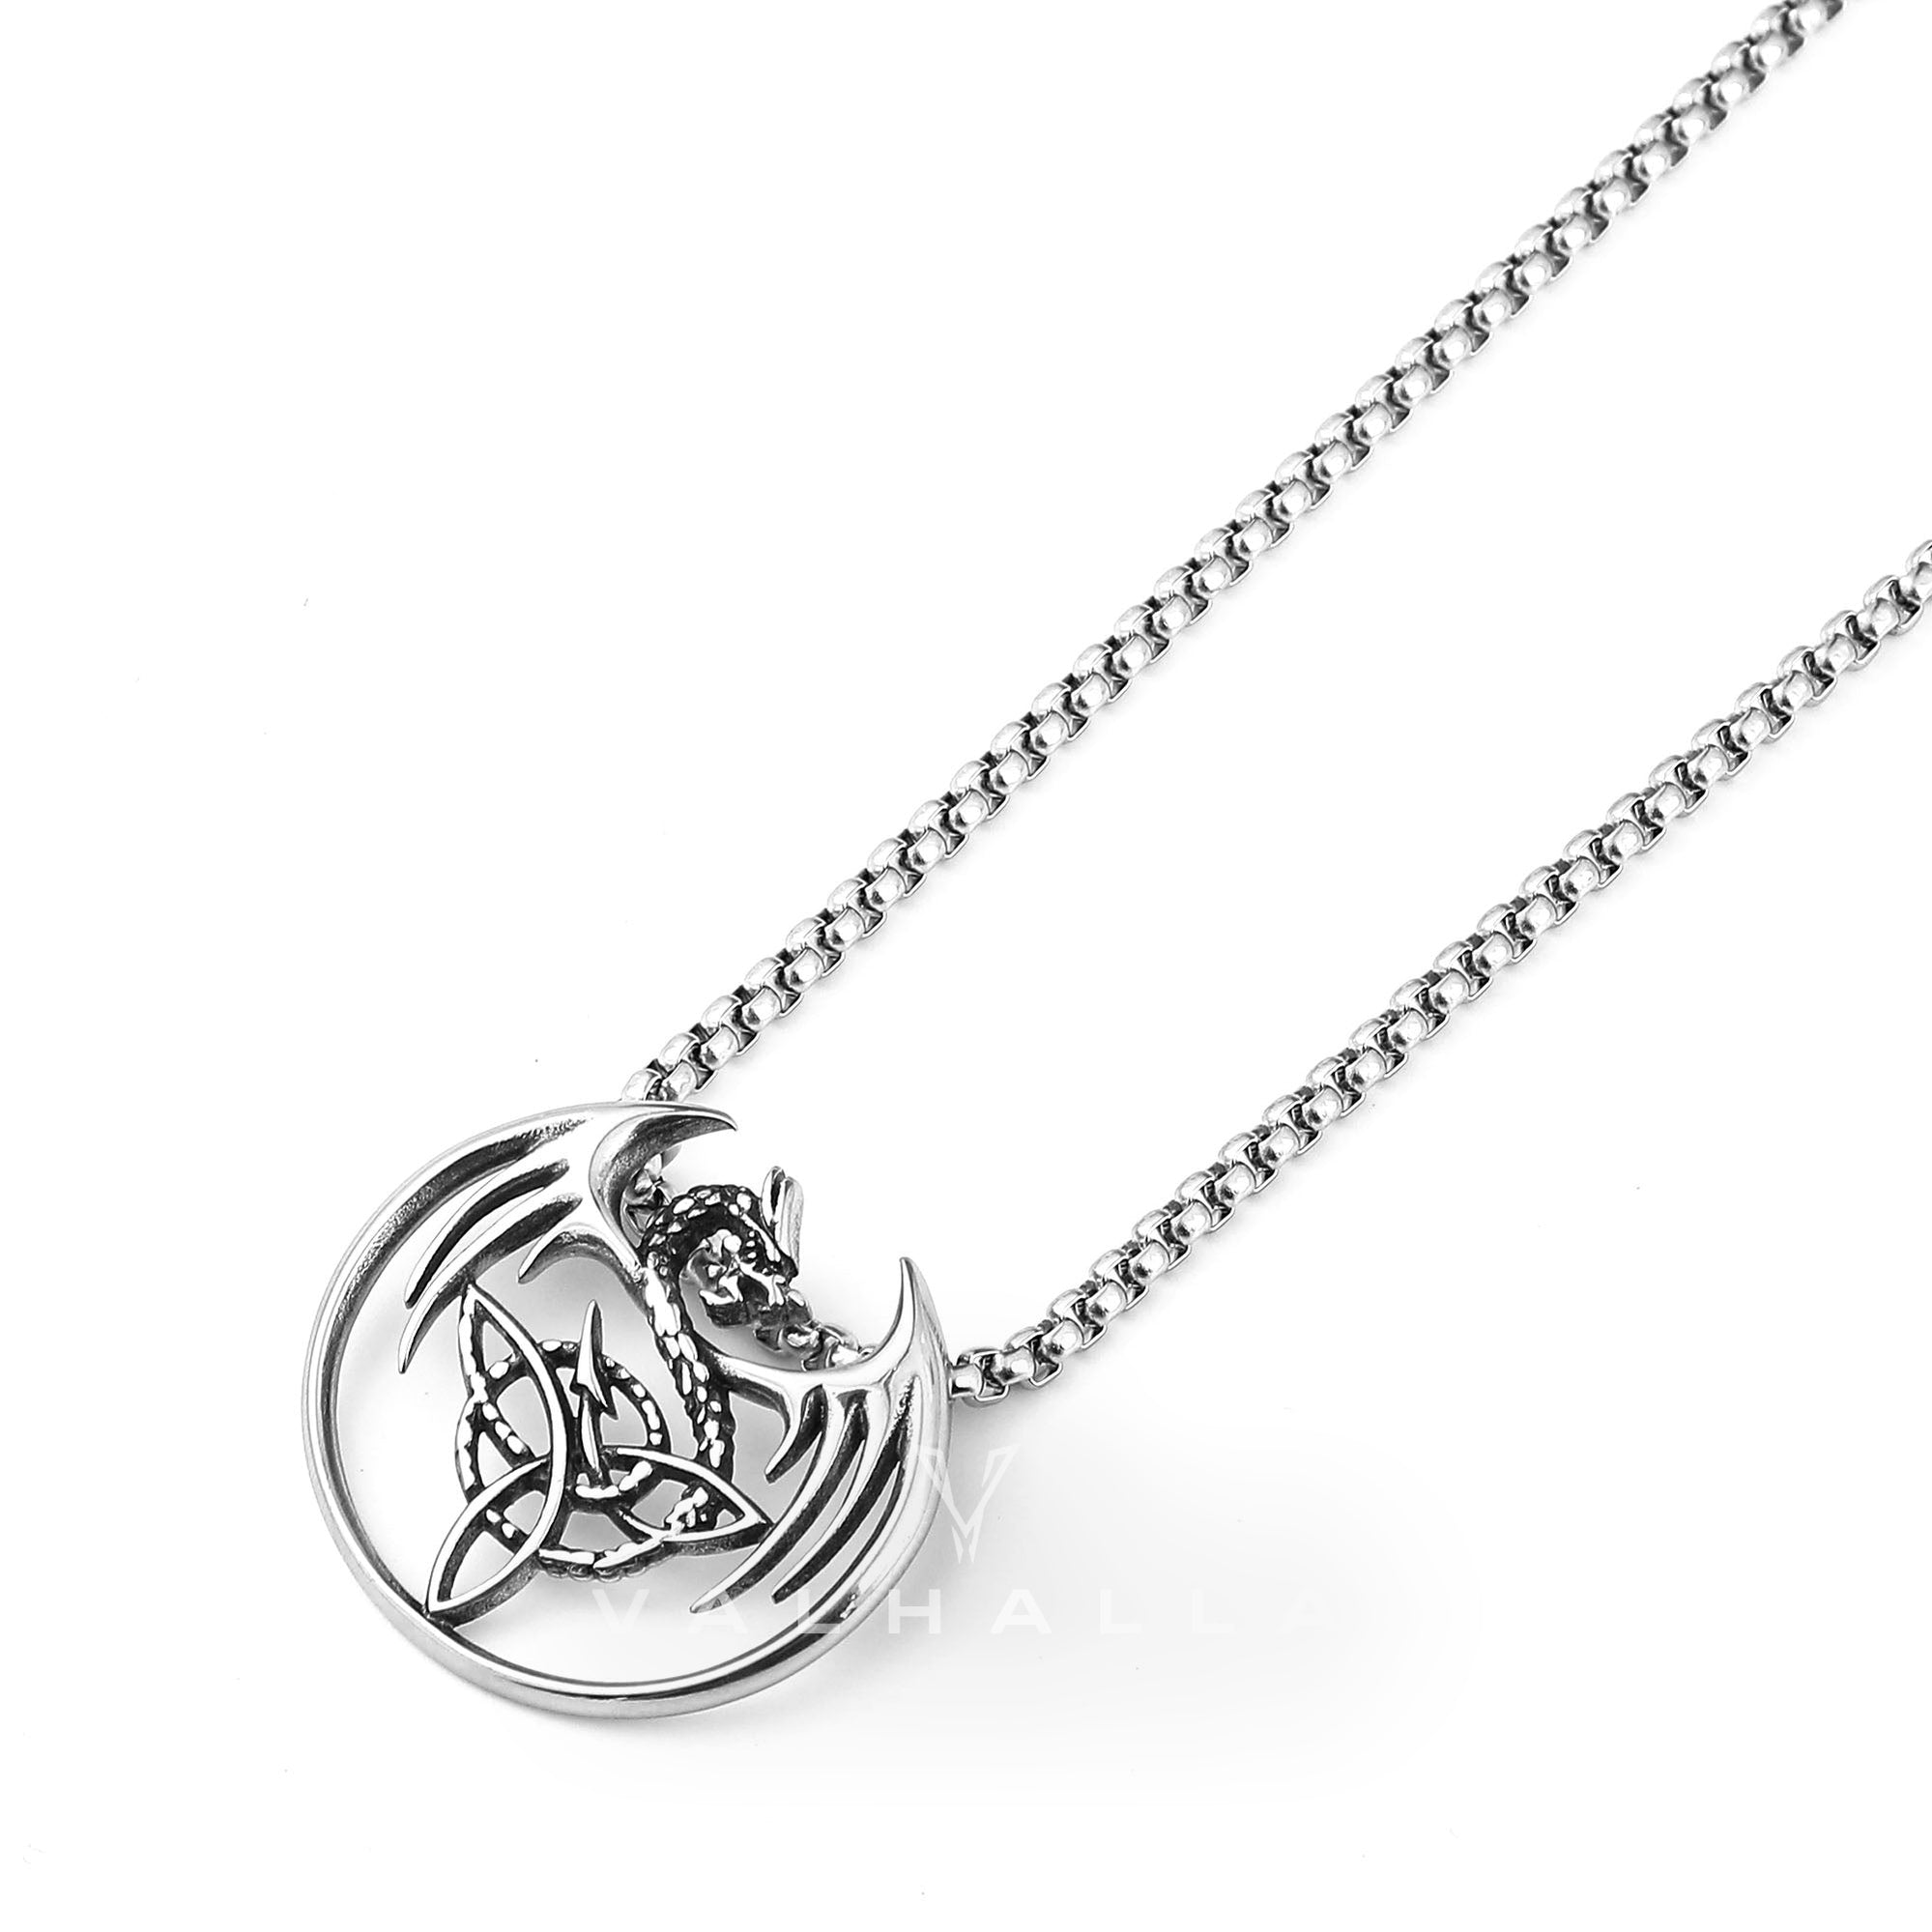 Norse Celtic Dragon Stainless Steel Pendant & Chain